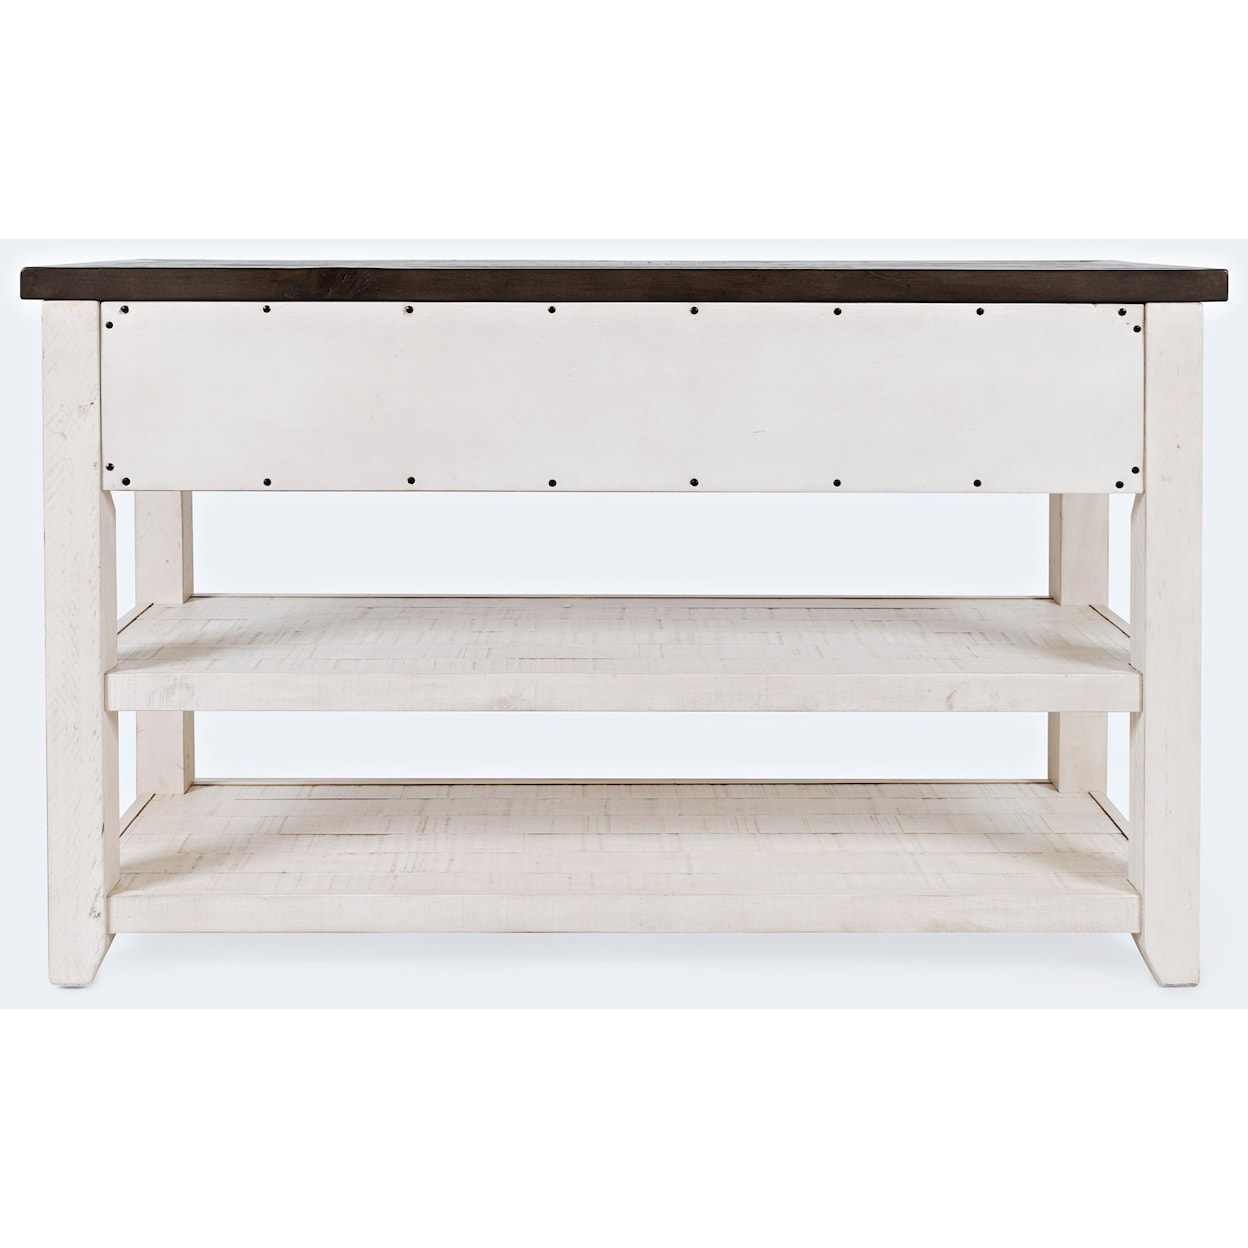 Jofran Madison County 3 Drawer Console-Vintage White